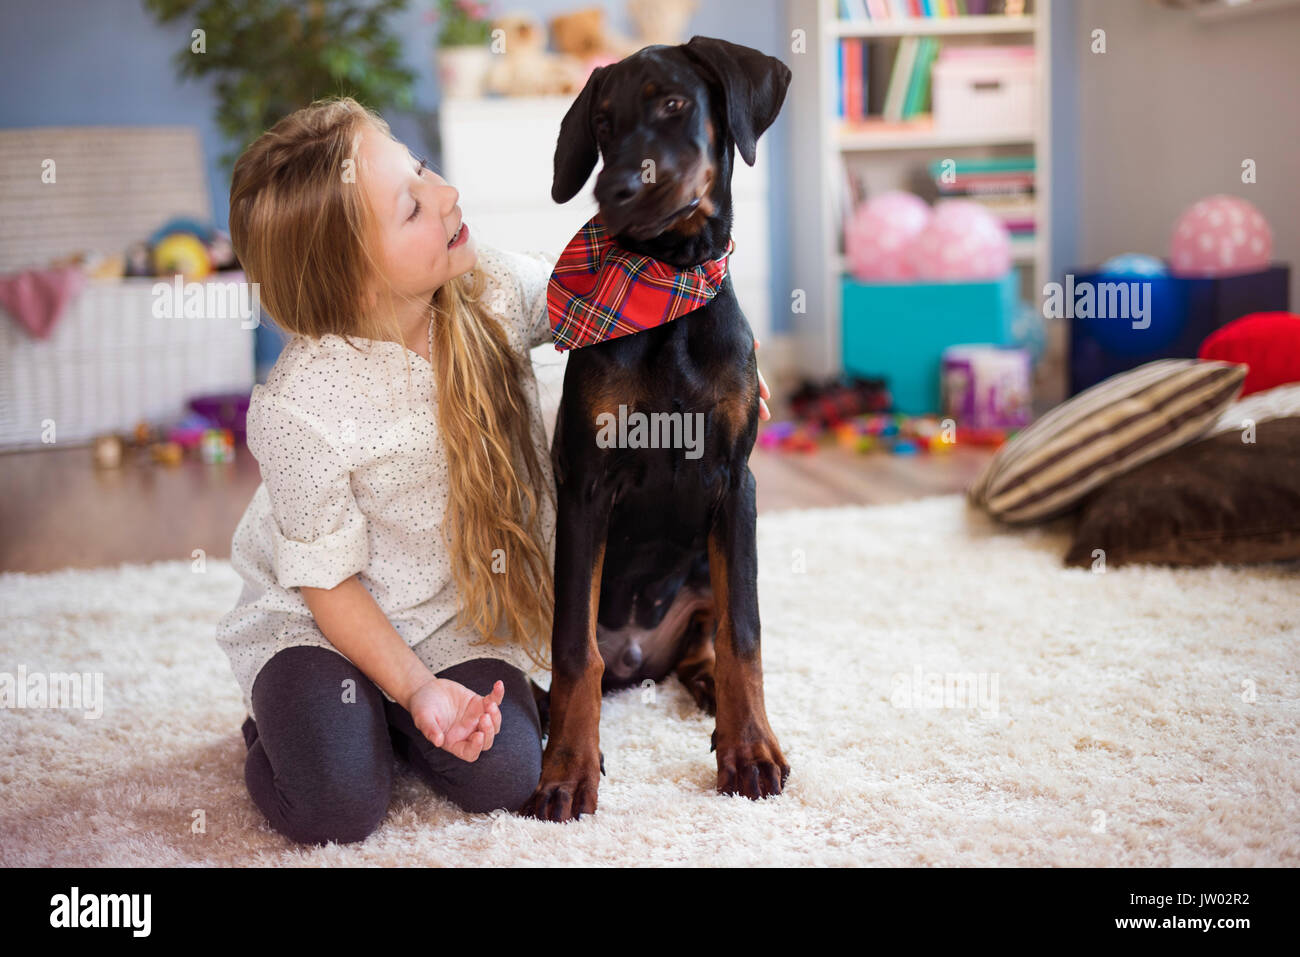 Spending time with dog at home Stock Photo